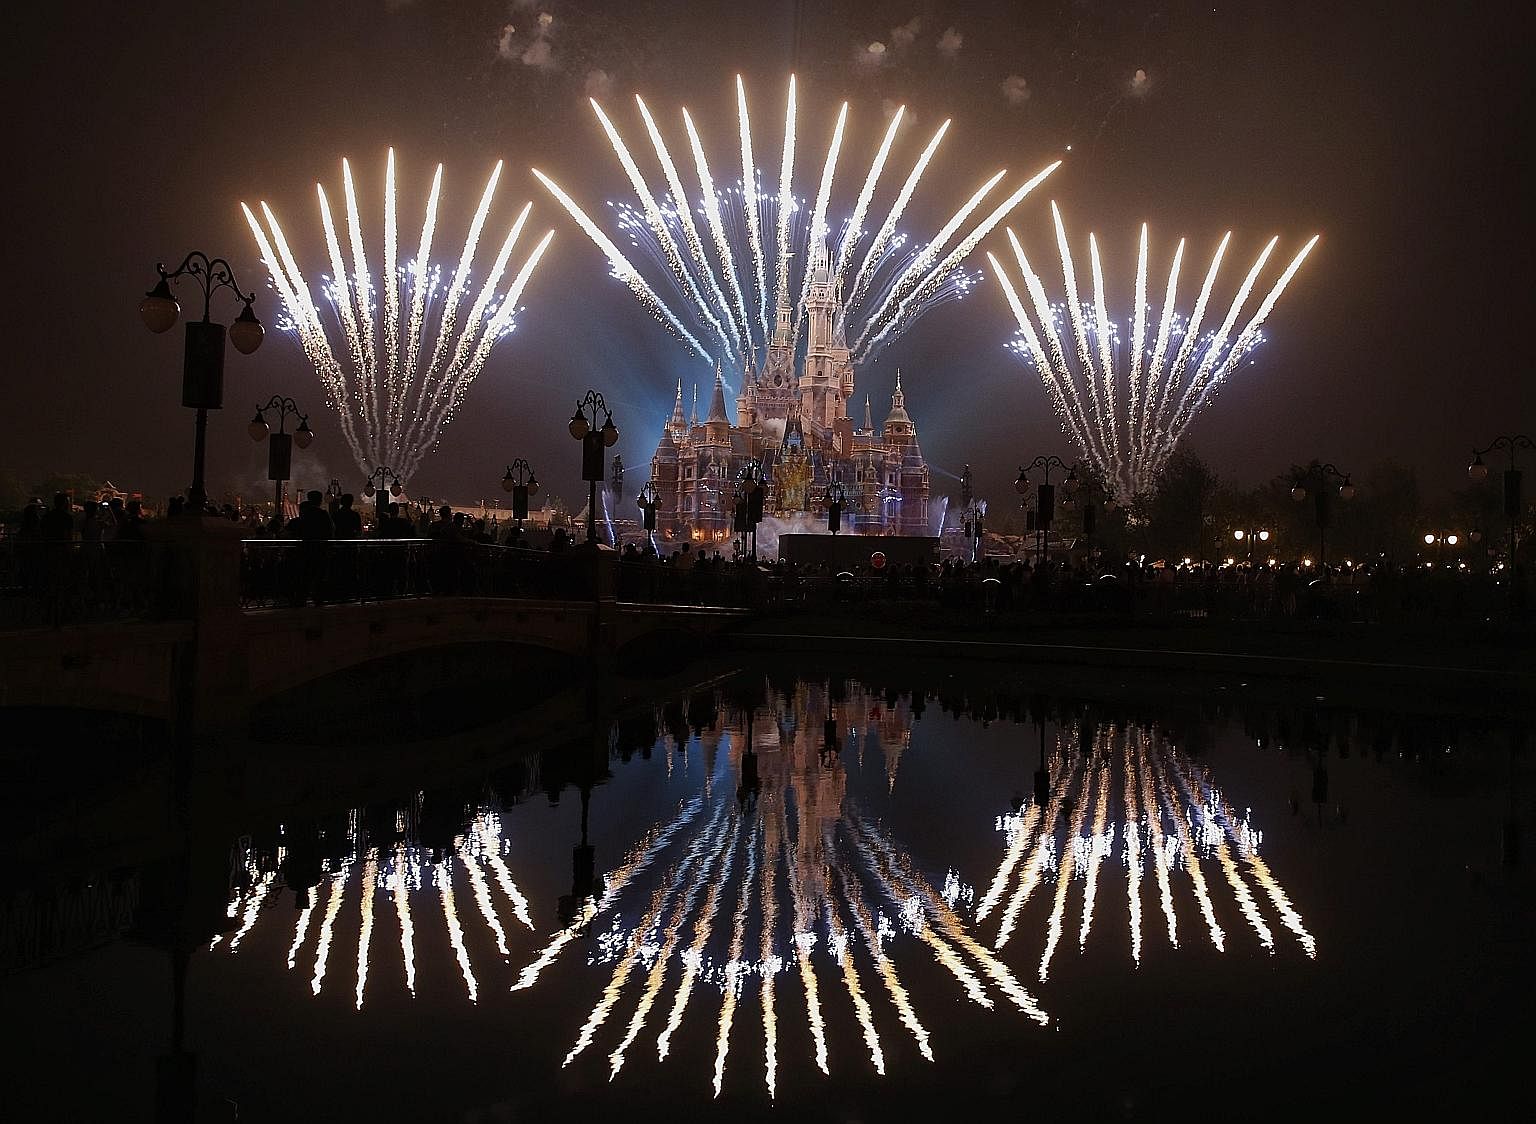 Fireworks lighting up the Enchanted Storybook Castle at the Shanghai Disney Resort which will officially open on June 16.